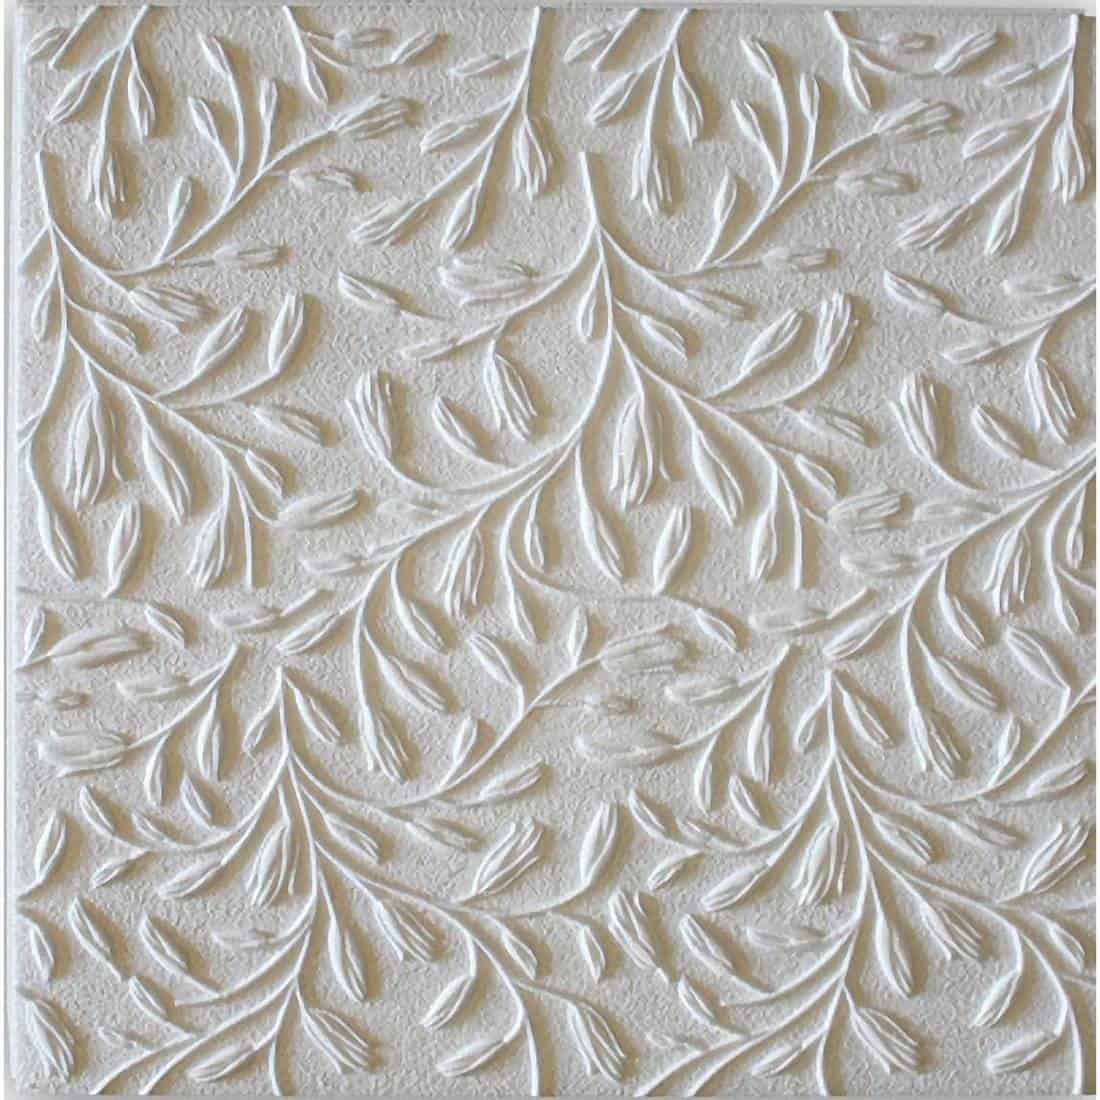 Styrofoam polystyrene ceiling tile texture with floral pattern